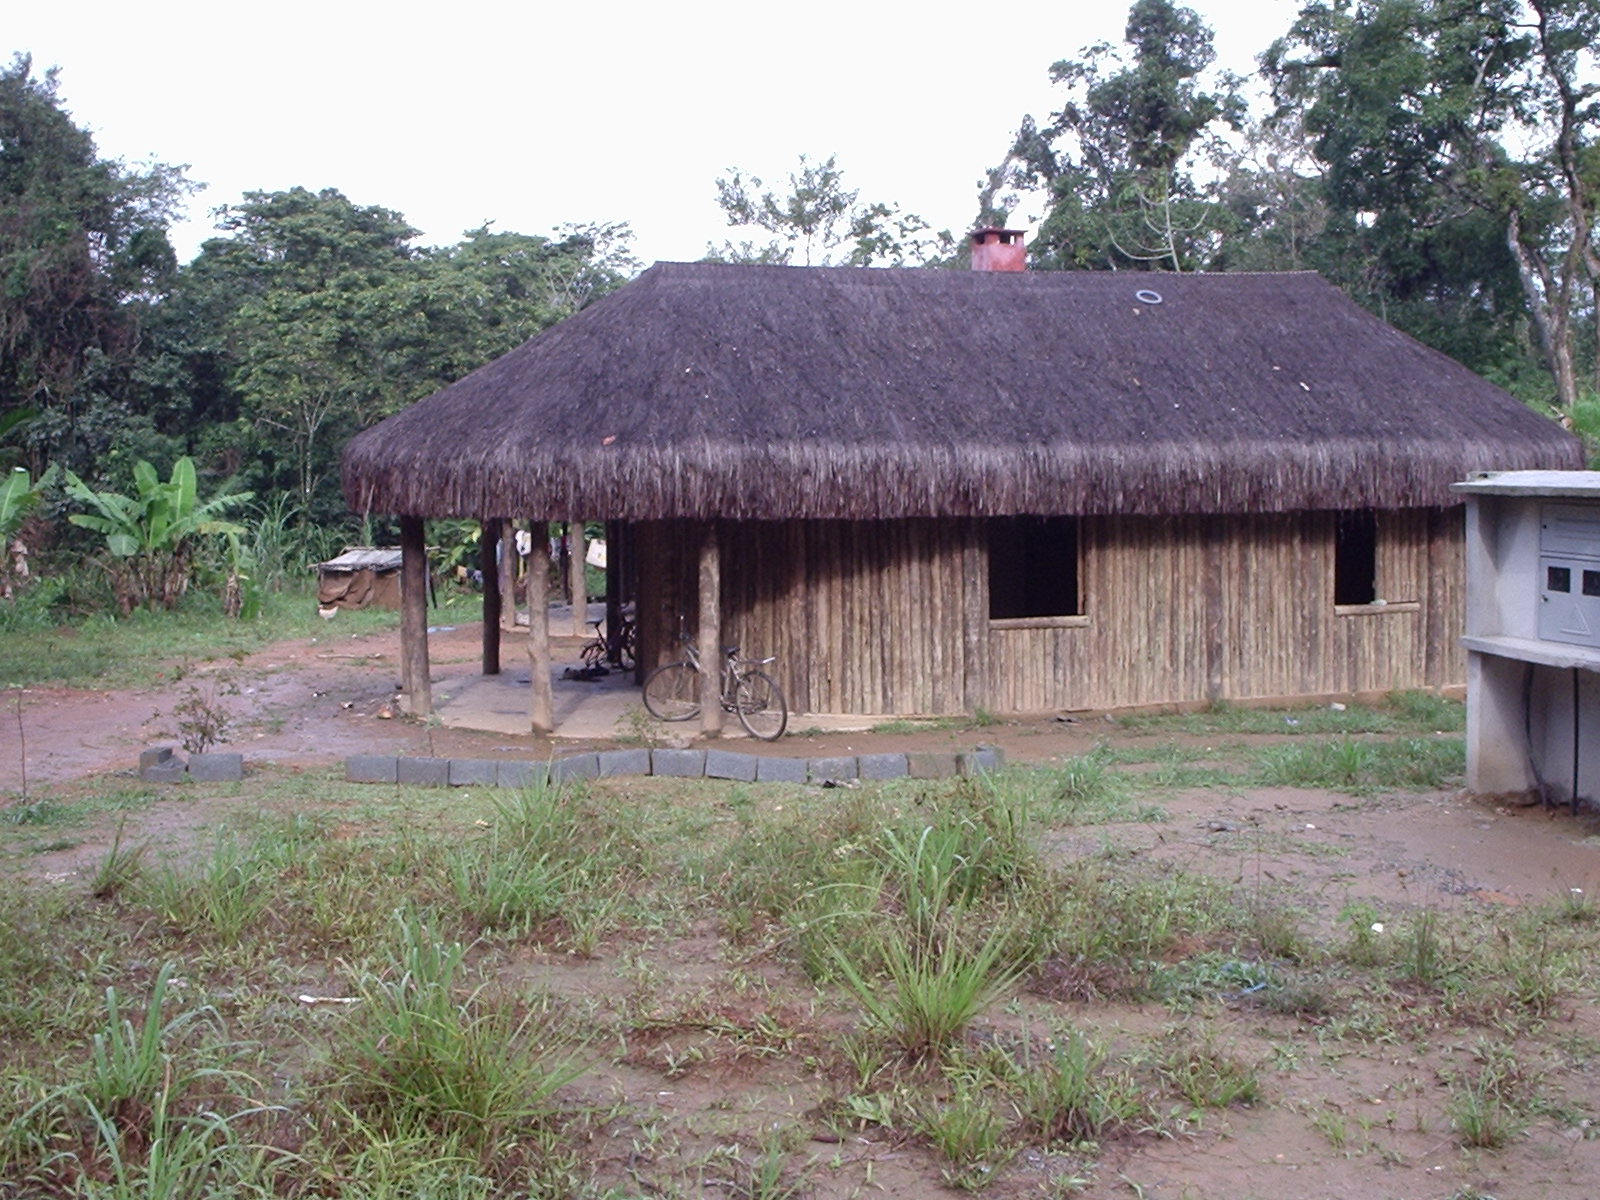 small hut with wood siding and grass roof in front of trees